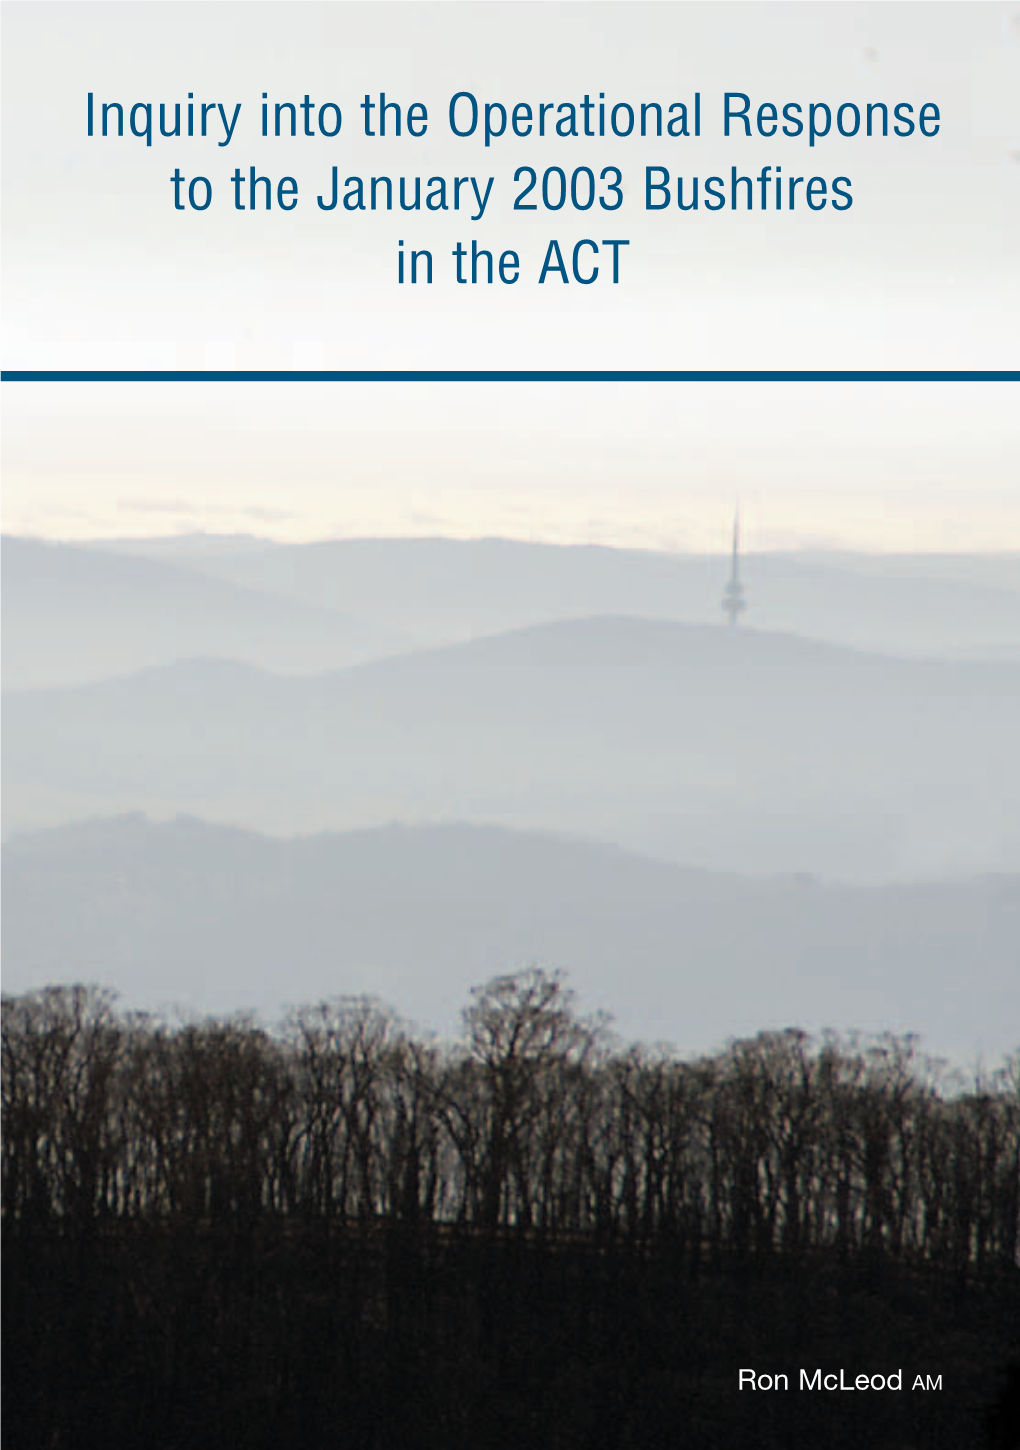 Inquiry Into the Operational Response to the January 2003 Bushfires in the ACT